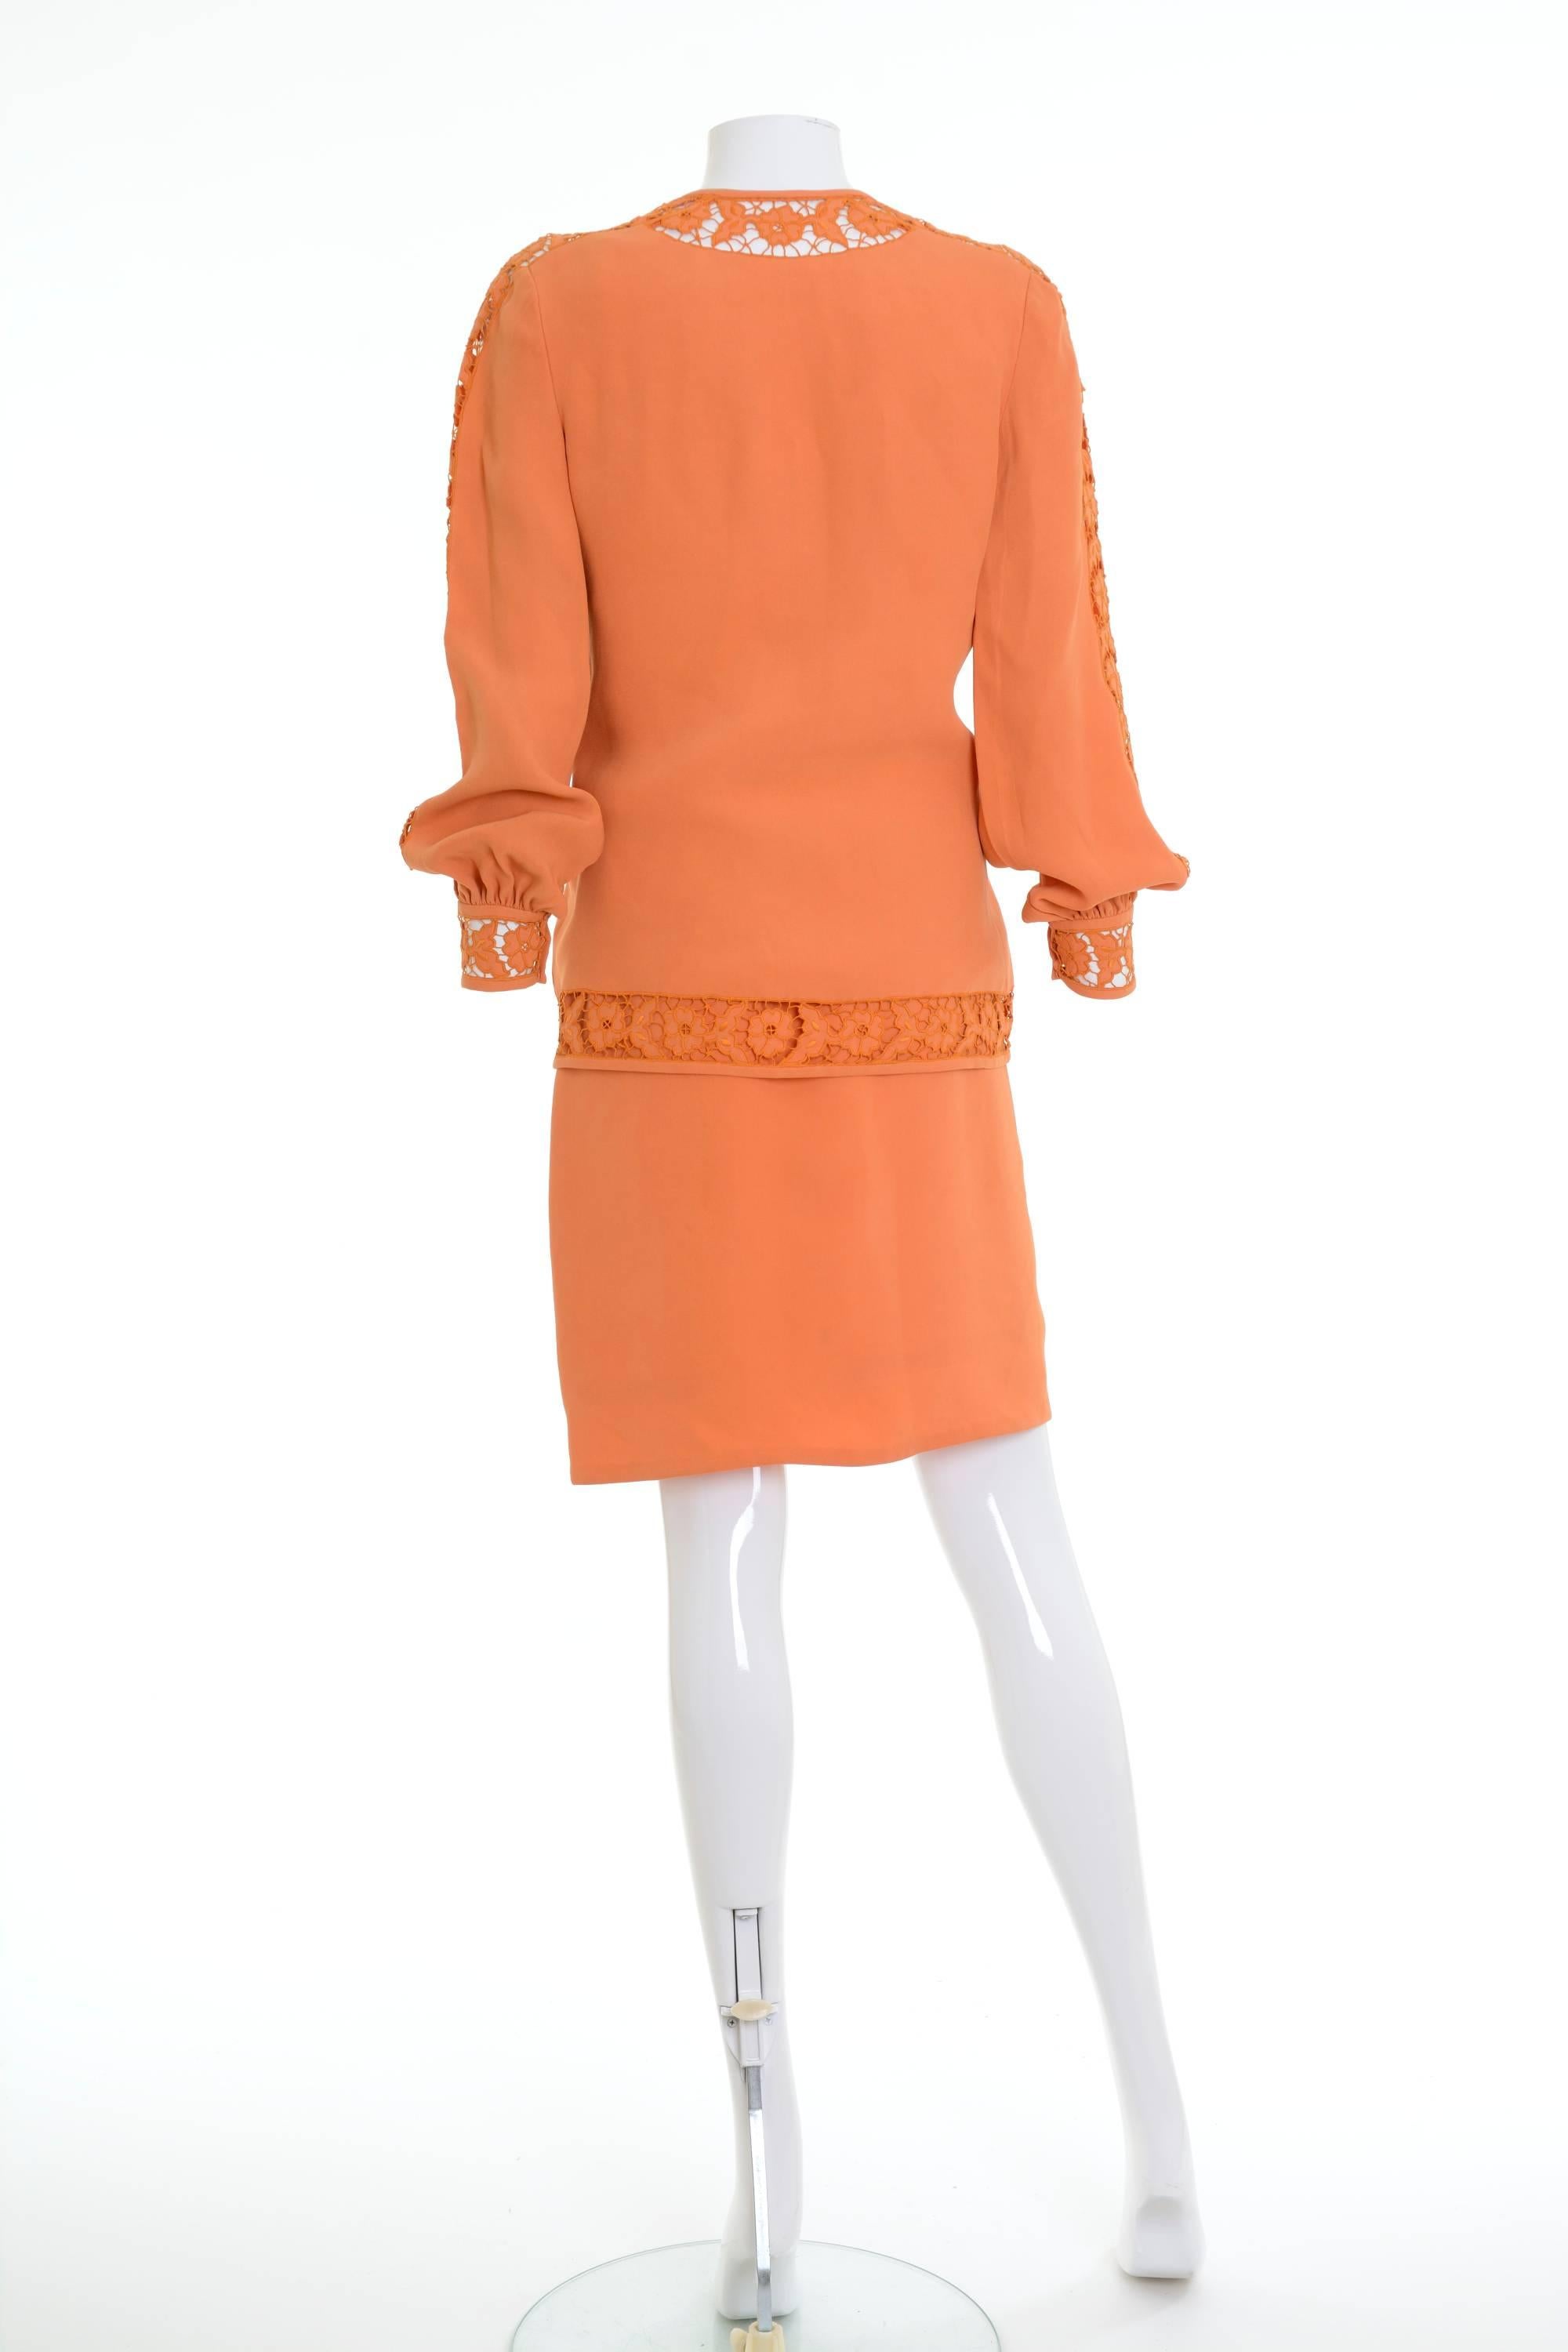 Late 1970s Lancetti skirt suit with top in a orange silk fabric. Jacket with hook and eye closure, cutwork embroidery around the edges and the cuffs. Top with cutwork embroidery, spaghetti straps and side zip closure. Fully lined skirt with